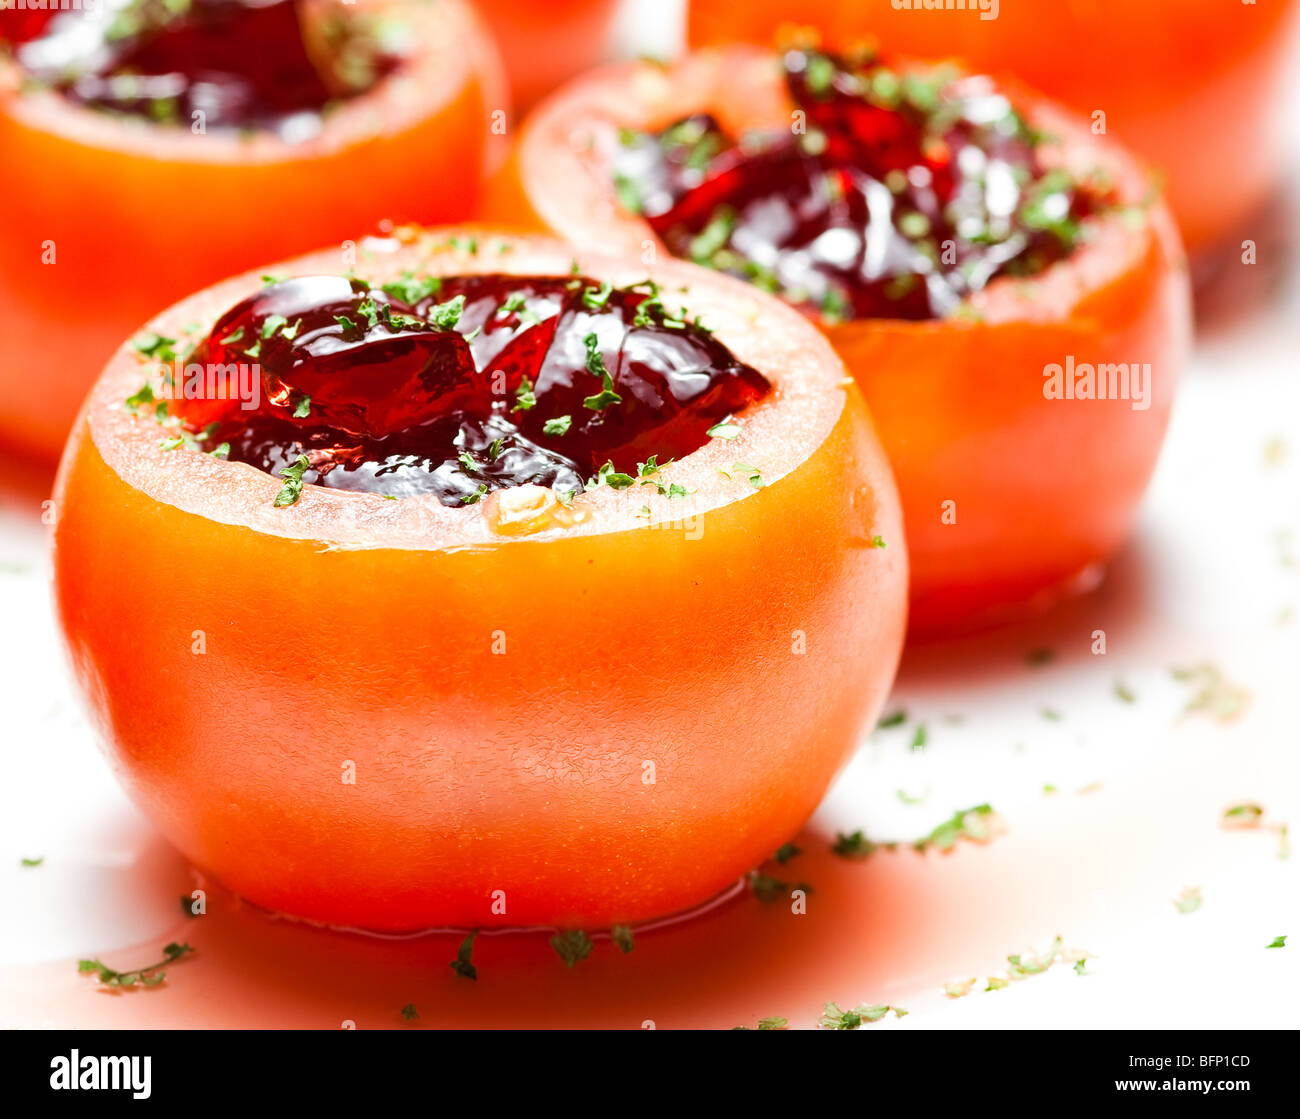 Stuffed tomatoes sprinkled with small cut green herbs. Stock Photo